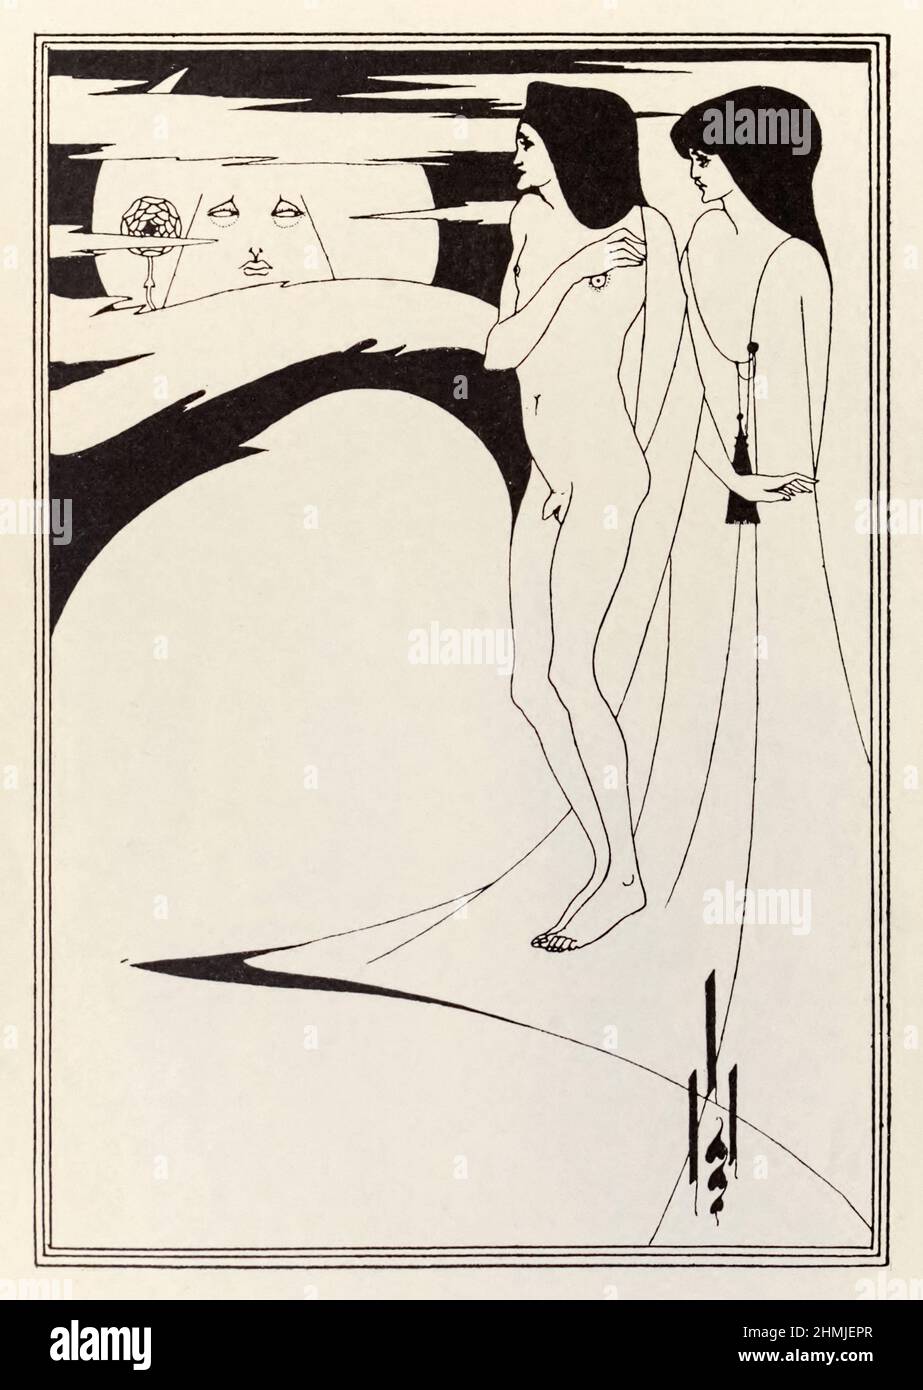 ‘The Woman and the Moon’ from ‘Salomé A Tragedy in One Act’ a play by Oscar Wilde (1854-1900) illustration by Aubrey Beardsley (1872-1898). Stock Photo